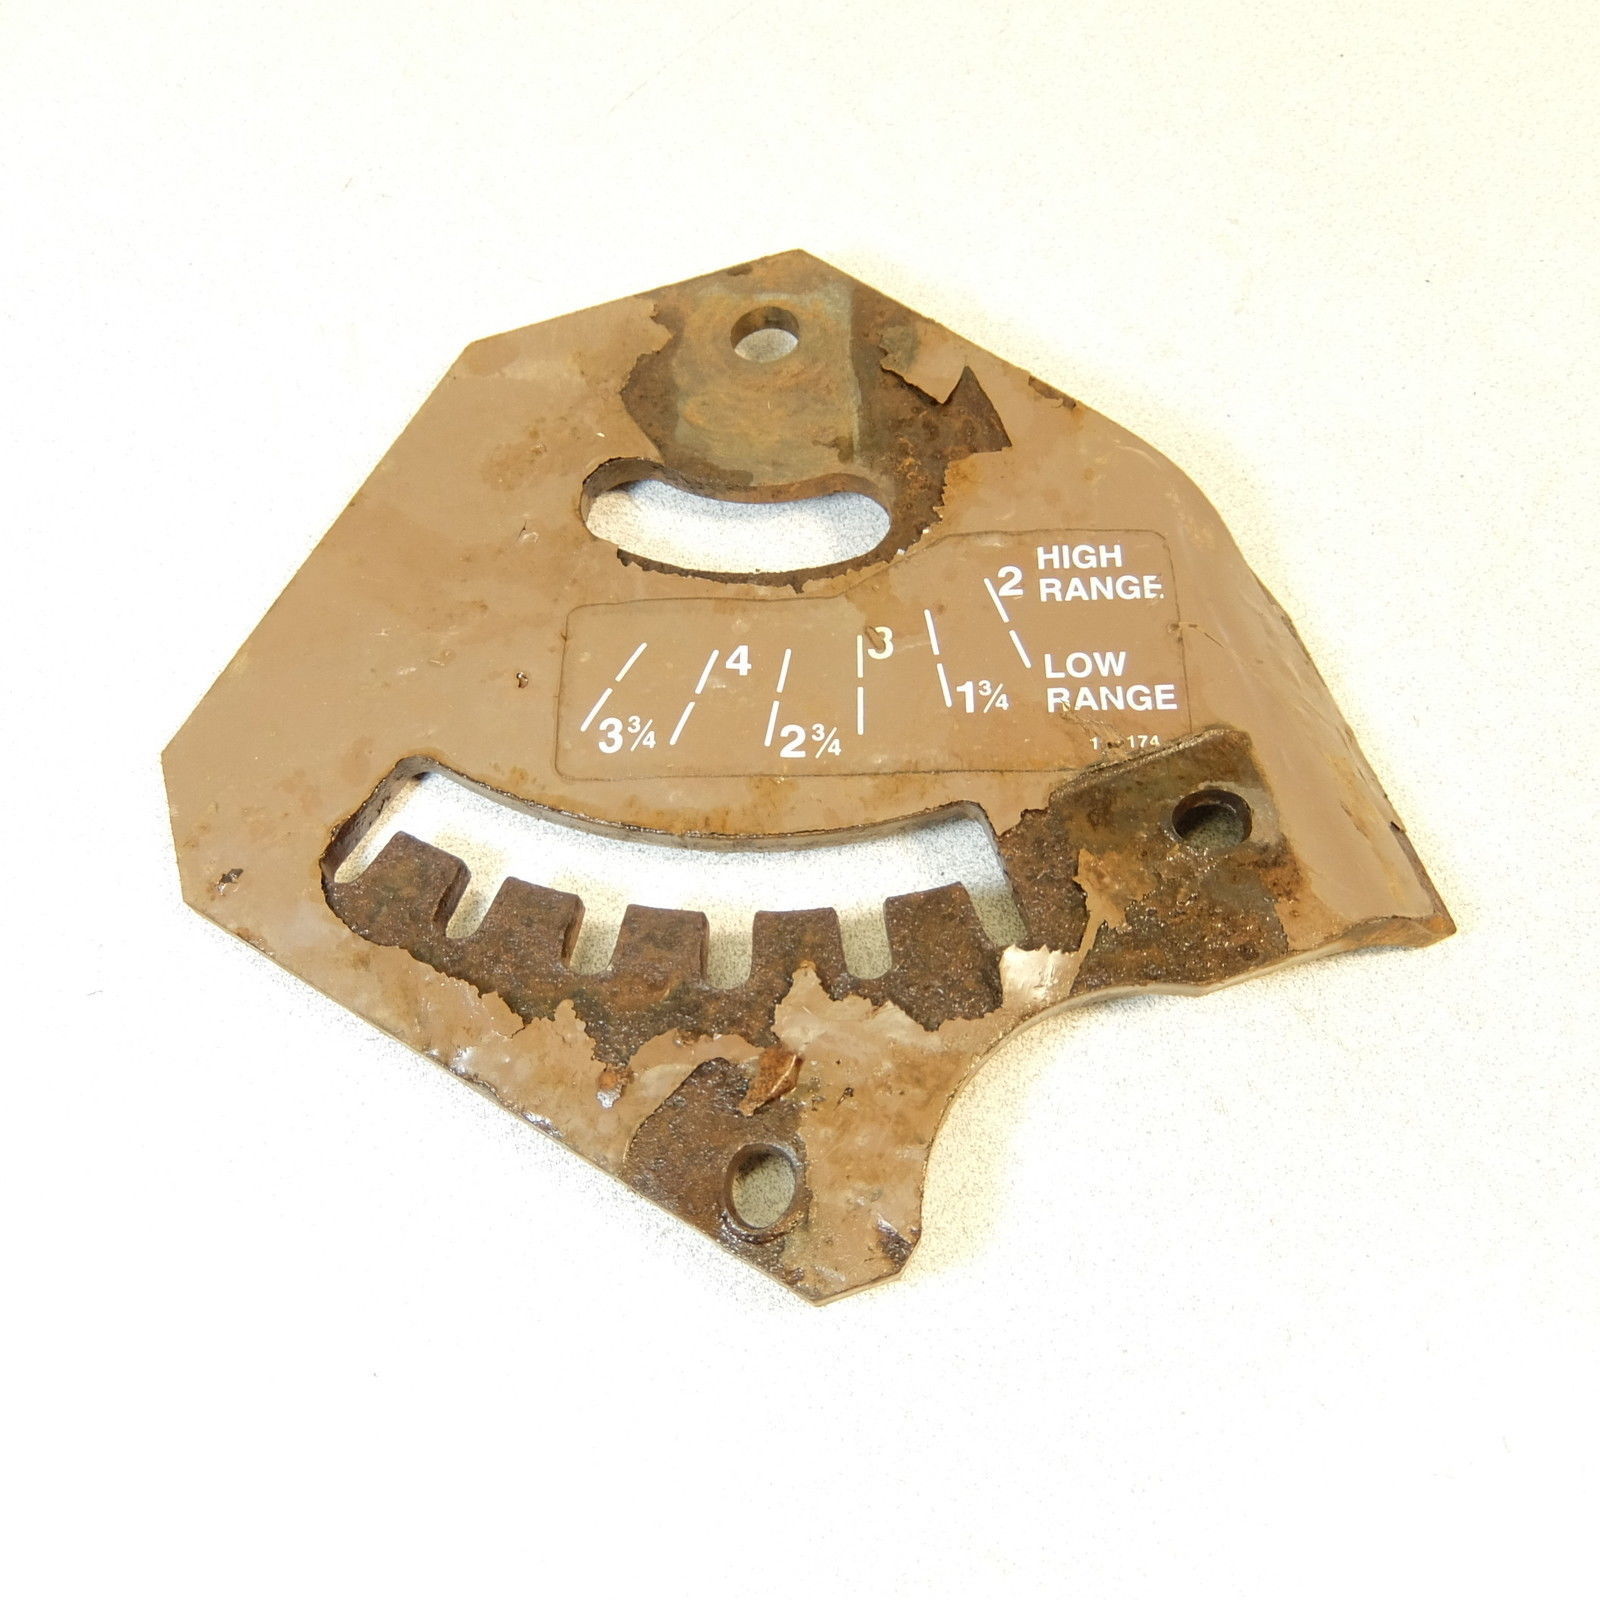 Used Grasshopper 726094 Knotch Lever Mount Plate fits 725-G2 w 9861 Deck - $8.00